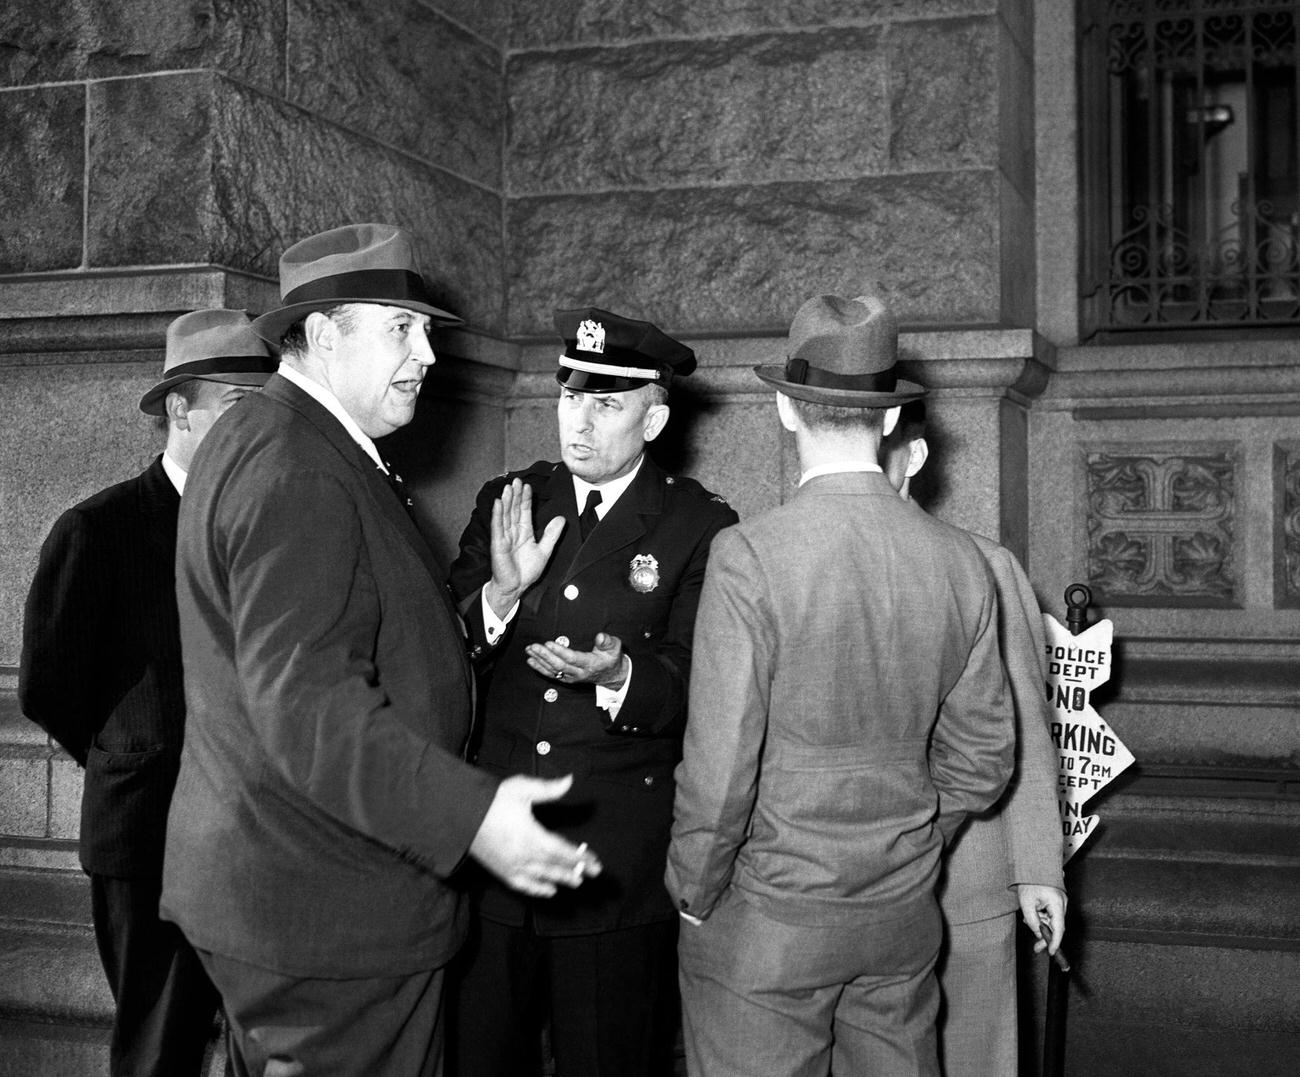 Heywood Broun Talks To A Police Officer During The Strike Against The Brooklyn Eagle, Brooklyn, Circa 1937.